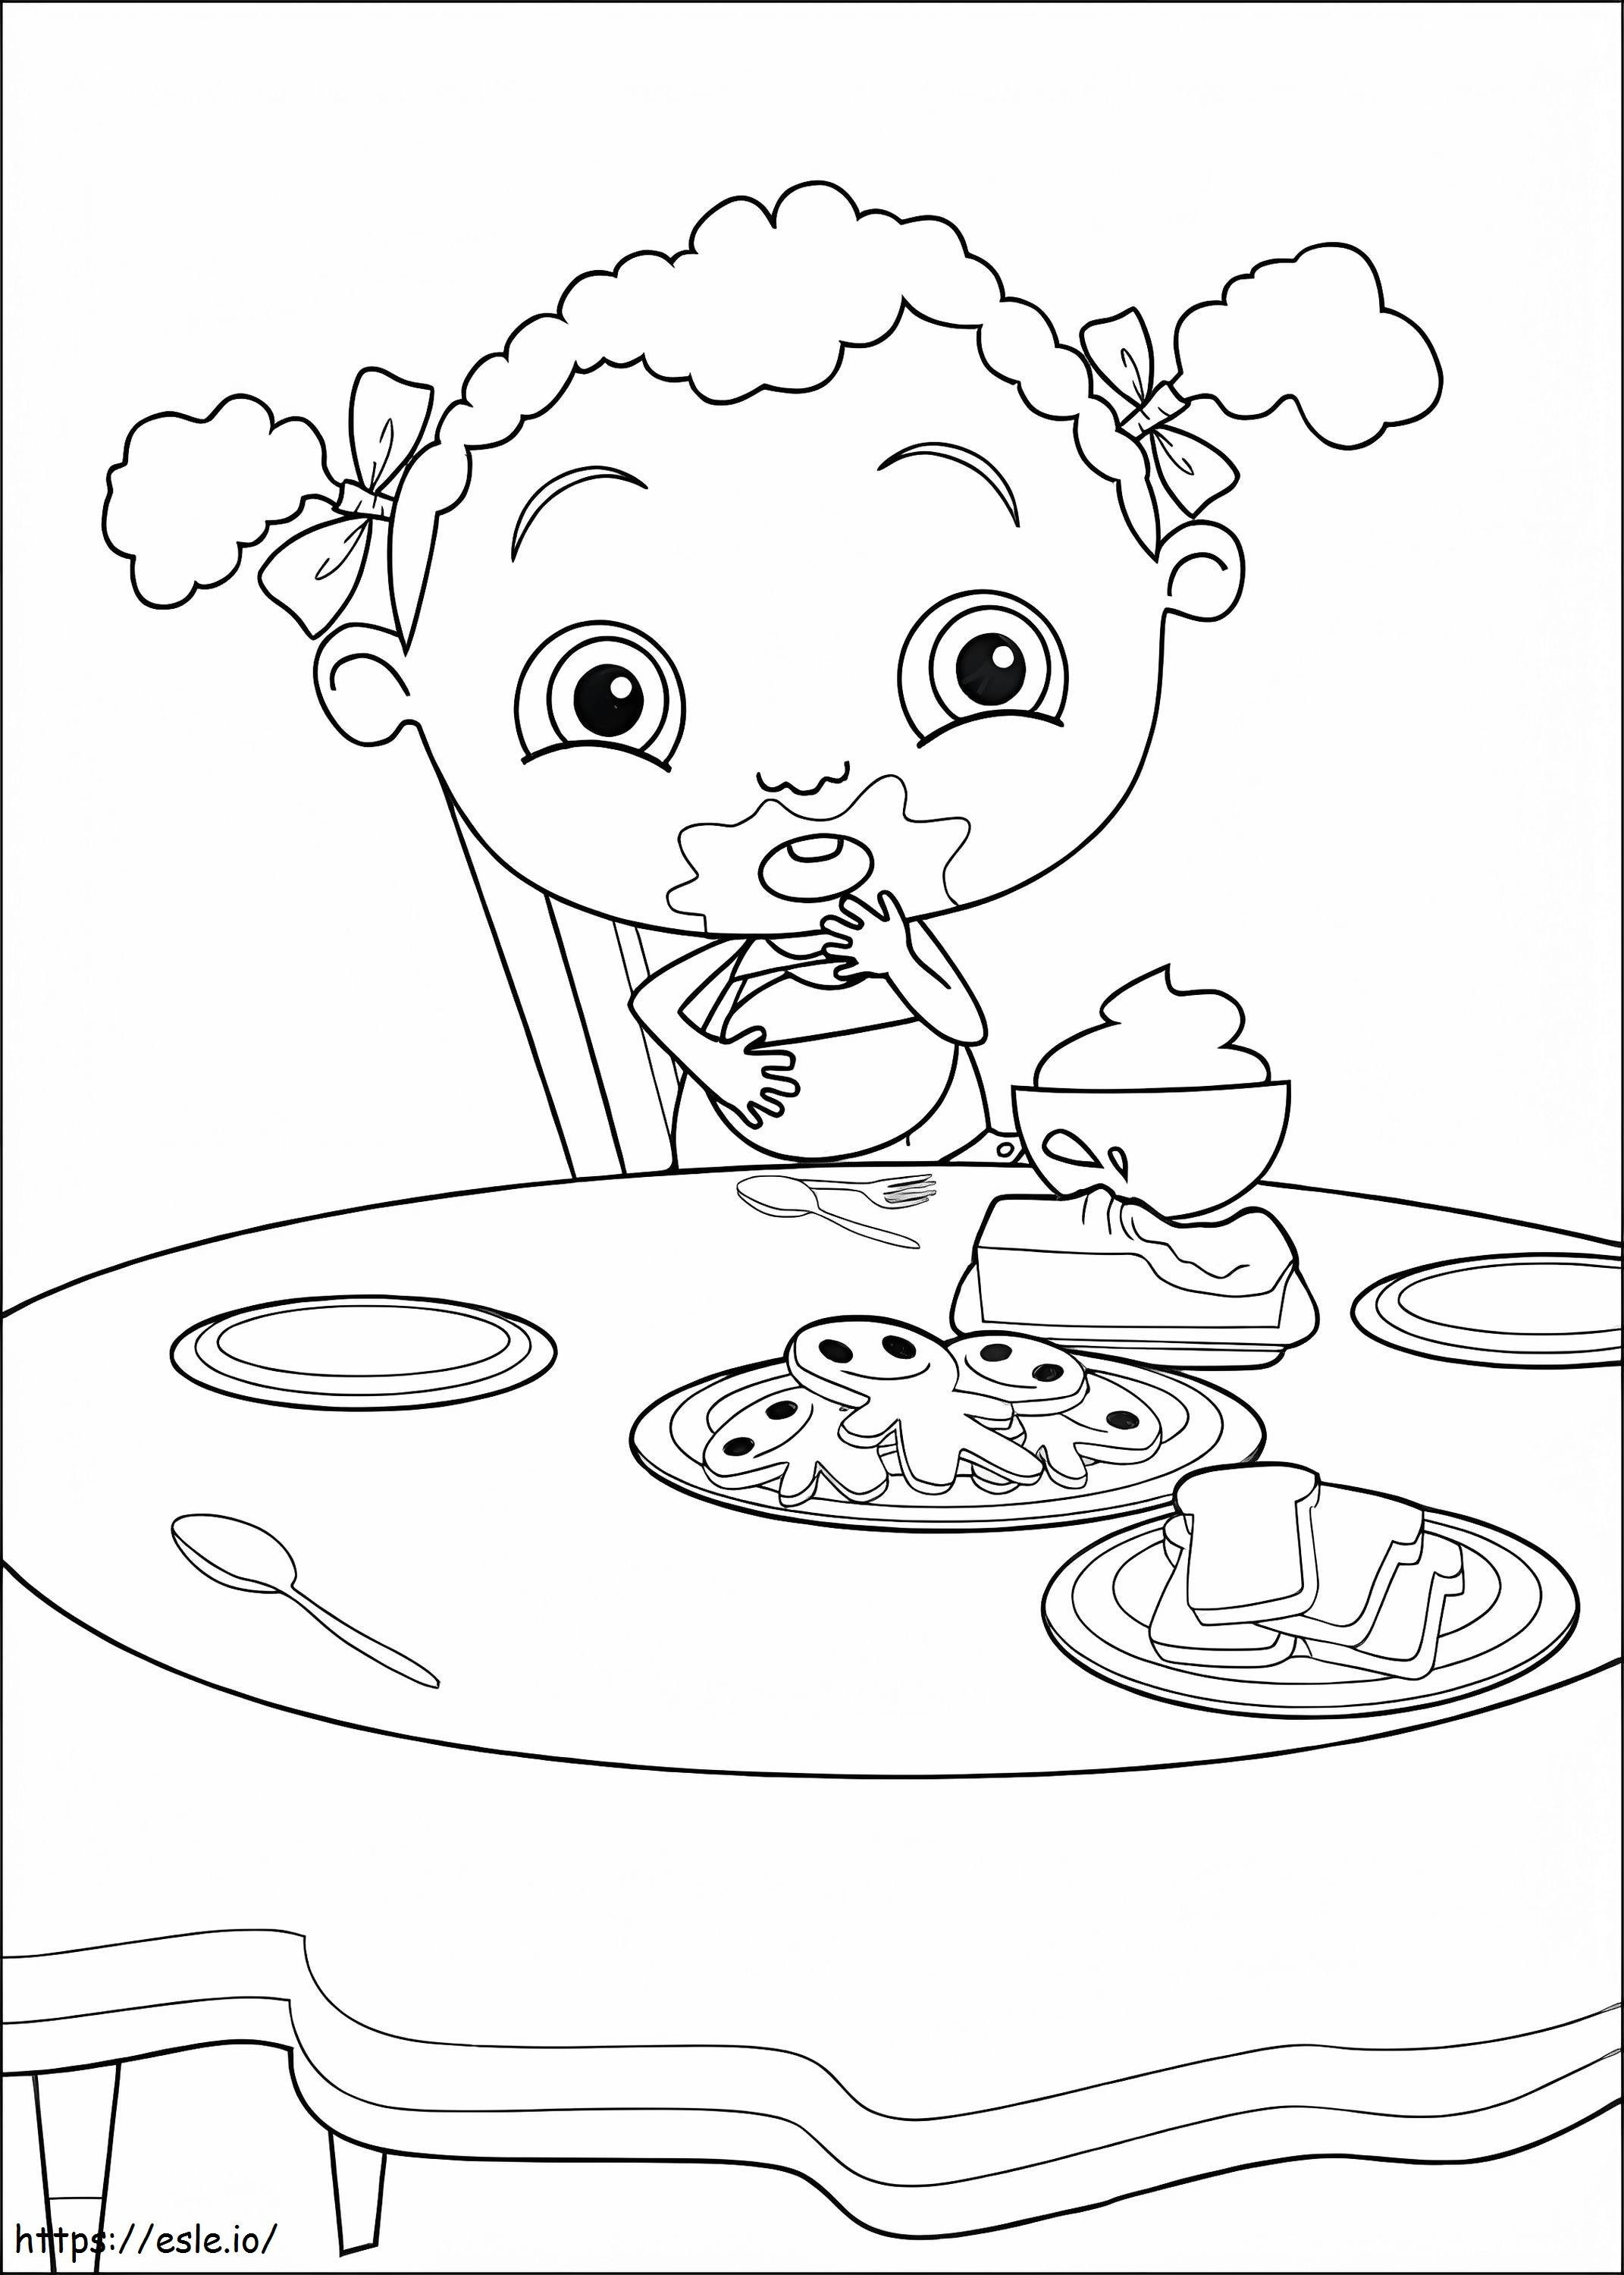 Funny Franny coloring page